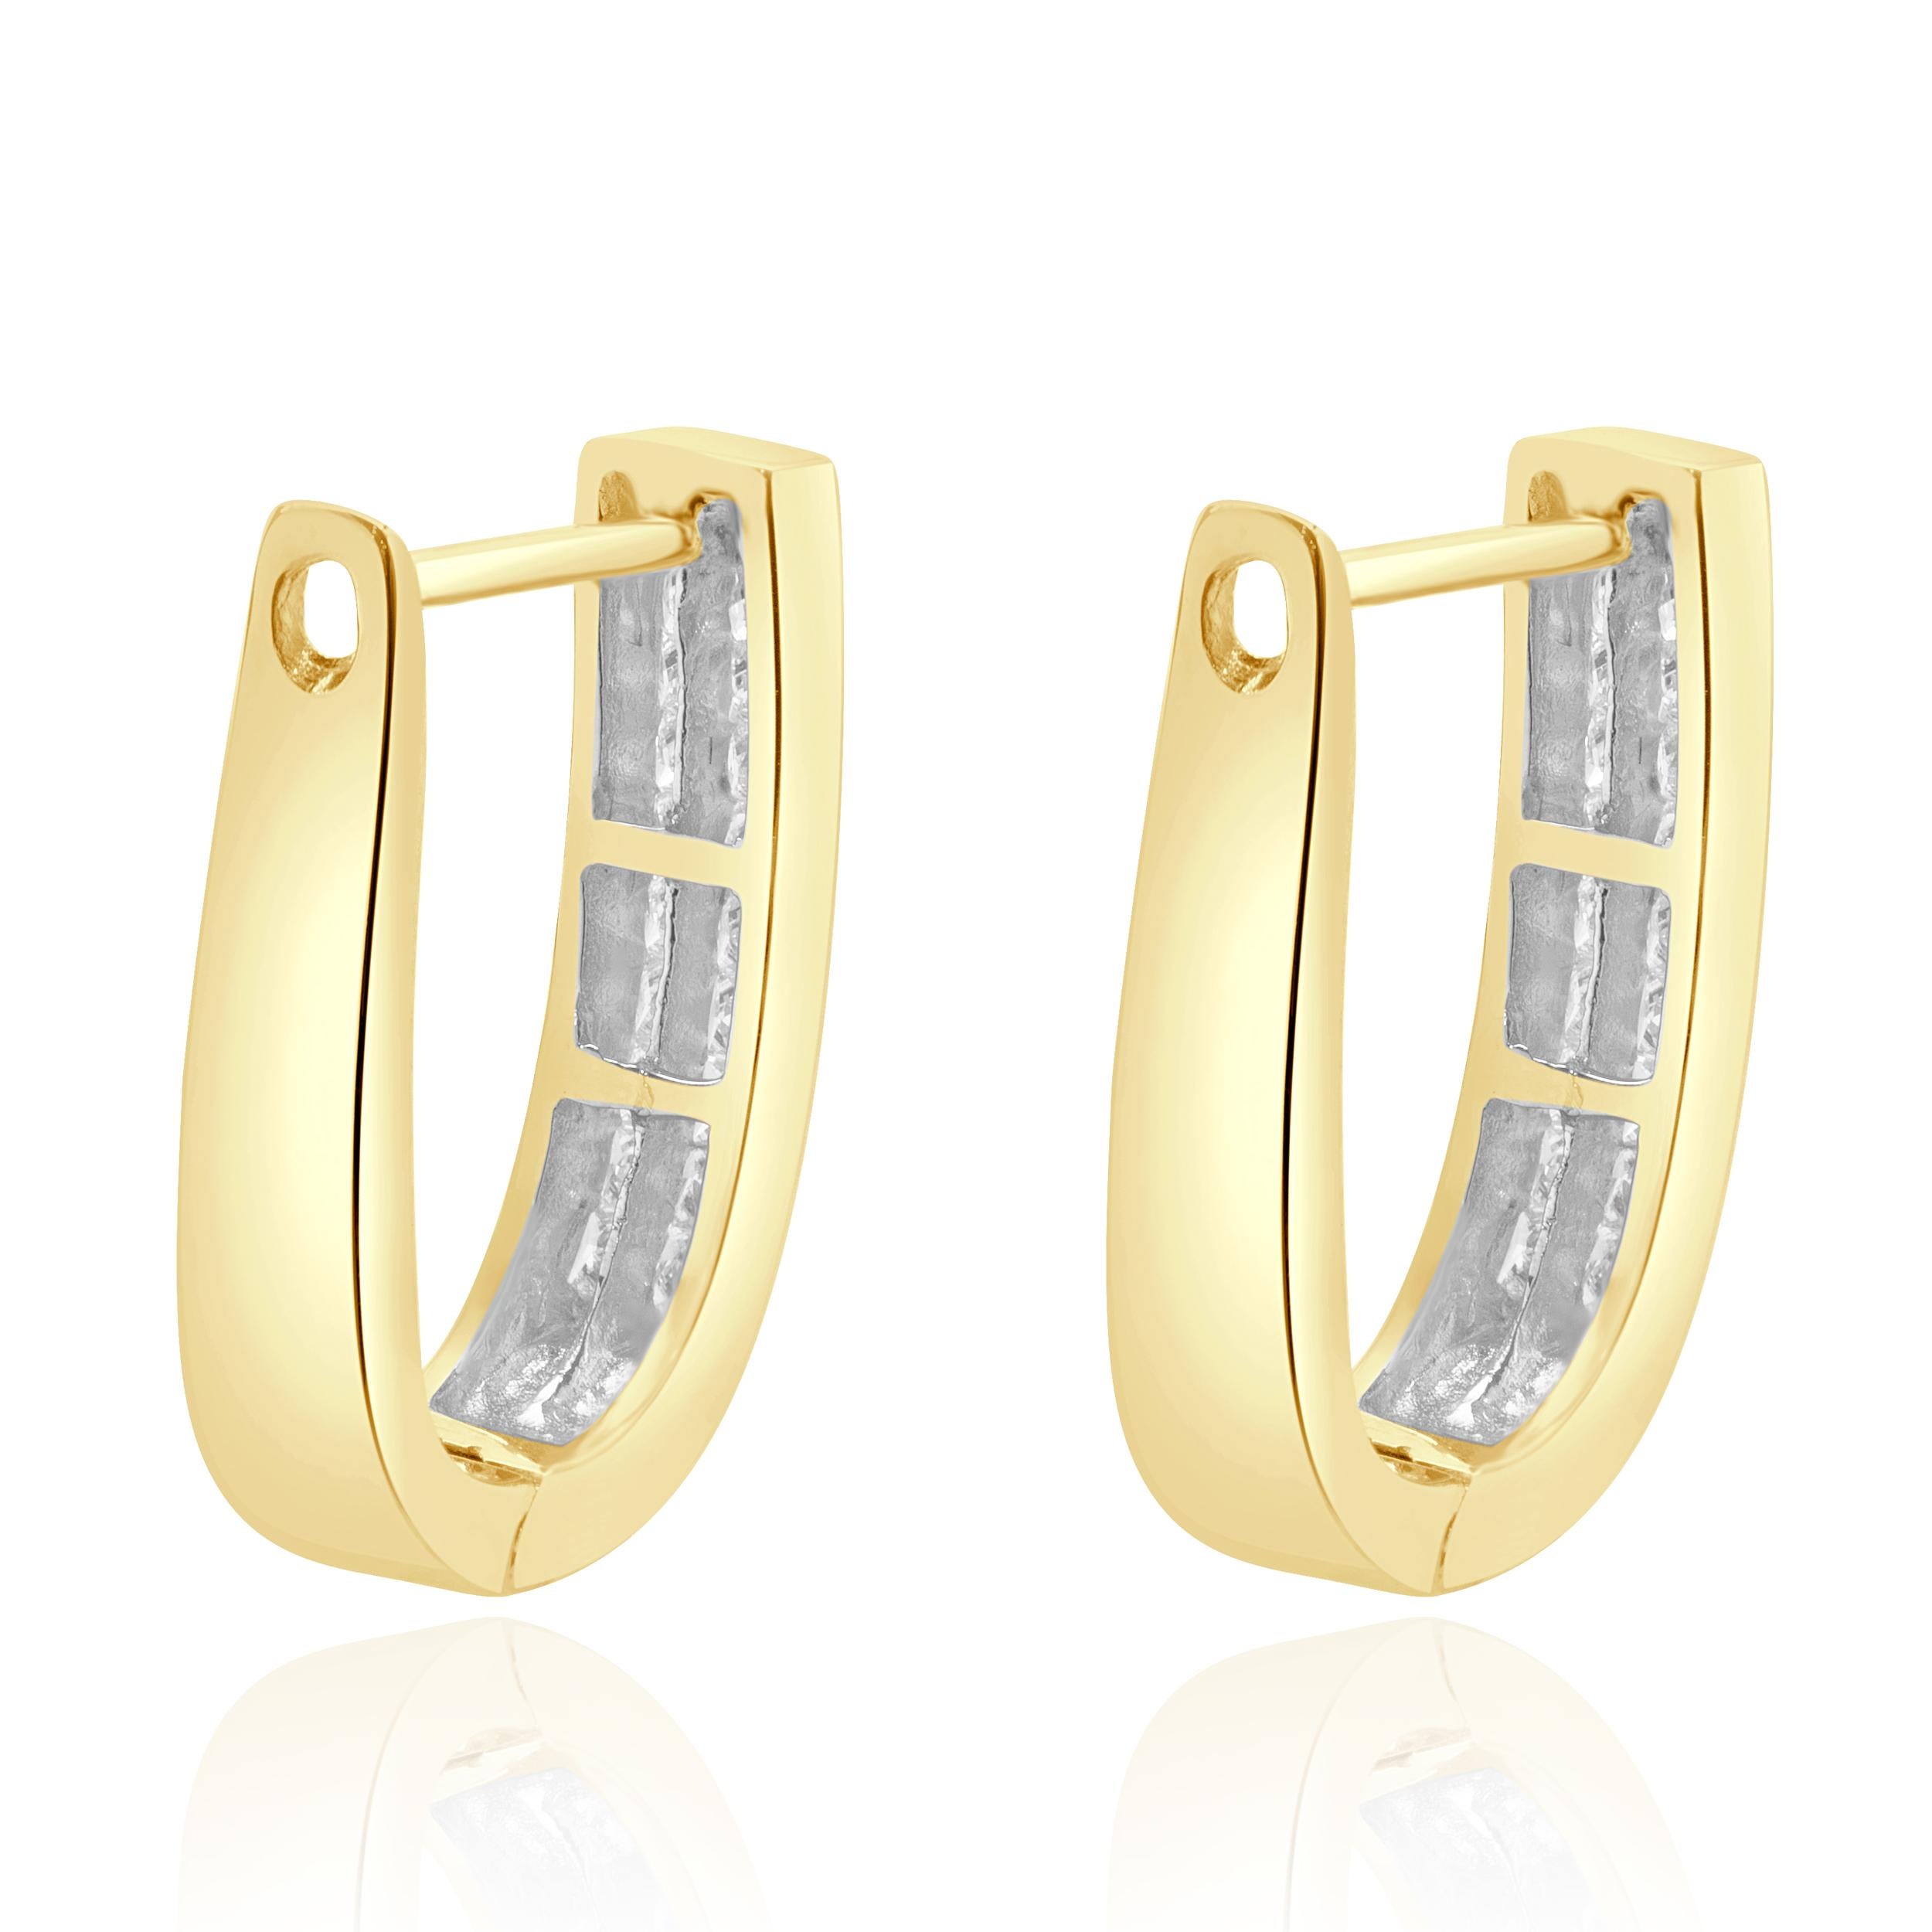 Material: 14K yellow gold
Diamonds: 36 princess cut = 1.08cttw
Color: G
Clarity: VS1-2
Dimensions: earrings measure approximately 16 x 4mm in diameter
Fastenings: snap backs
Weight: 4.50 grams
